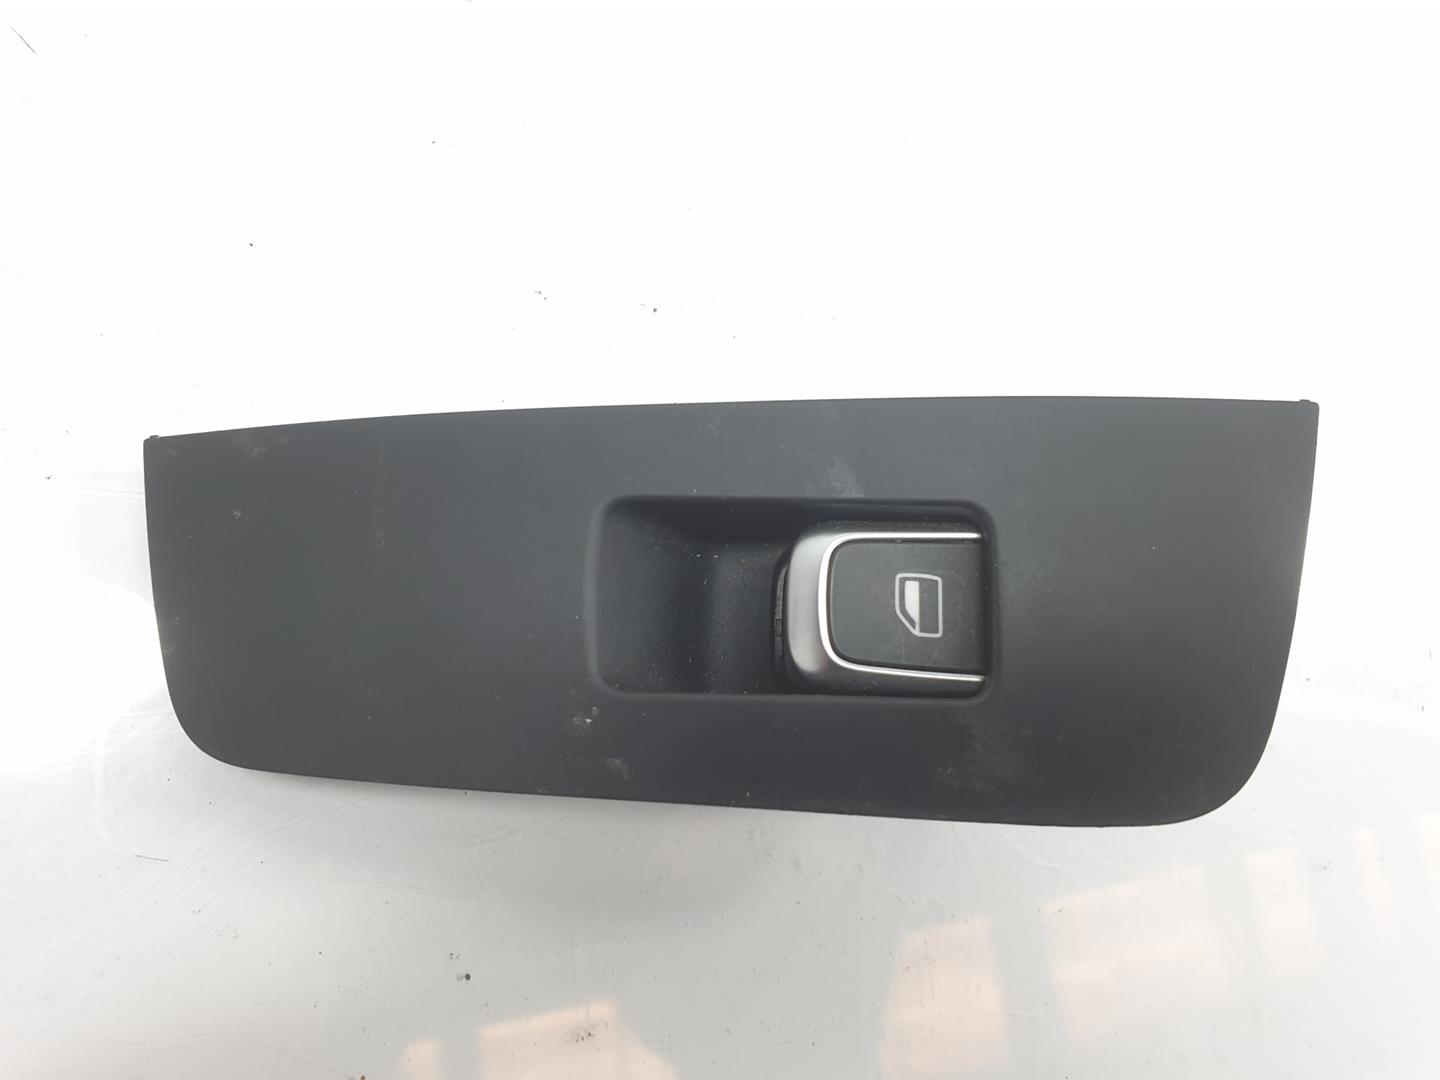 AUDI A7 C7/4G (2010-2020) Rear Right Door Window Control Switch 4H0959855A, 4H0959855A 19820605